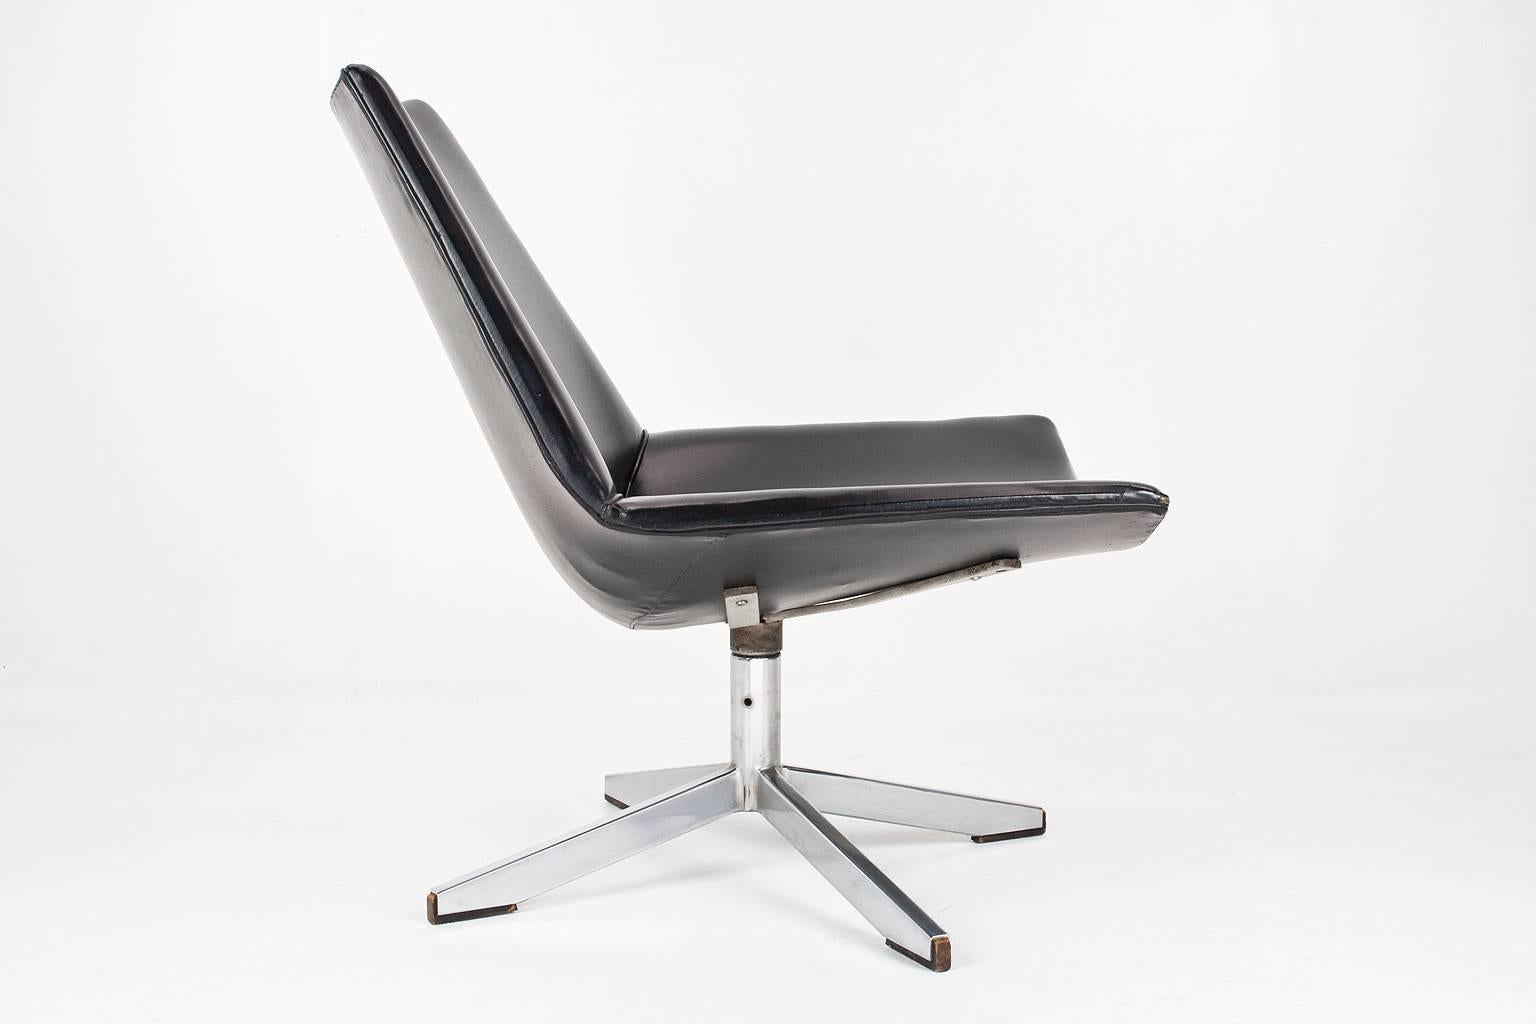 Very Rare Dutch swivel lounge chair model AP 19. Designed in 1960 by Hein Salomonson and Theo Tempelman for AP Originals.

This swivel chair is unique and in very good condition. Original shell upholstered in black leatherette / faux leather